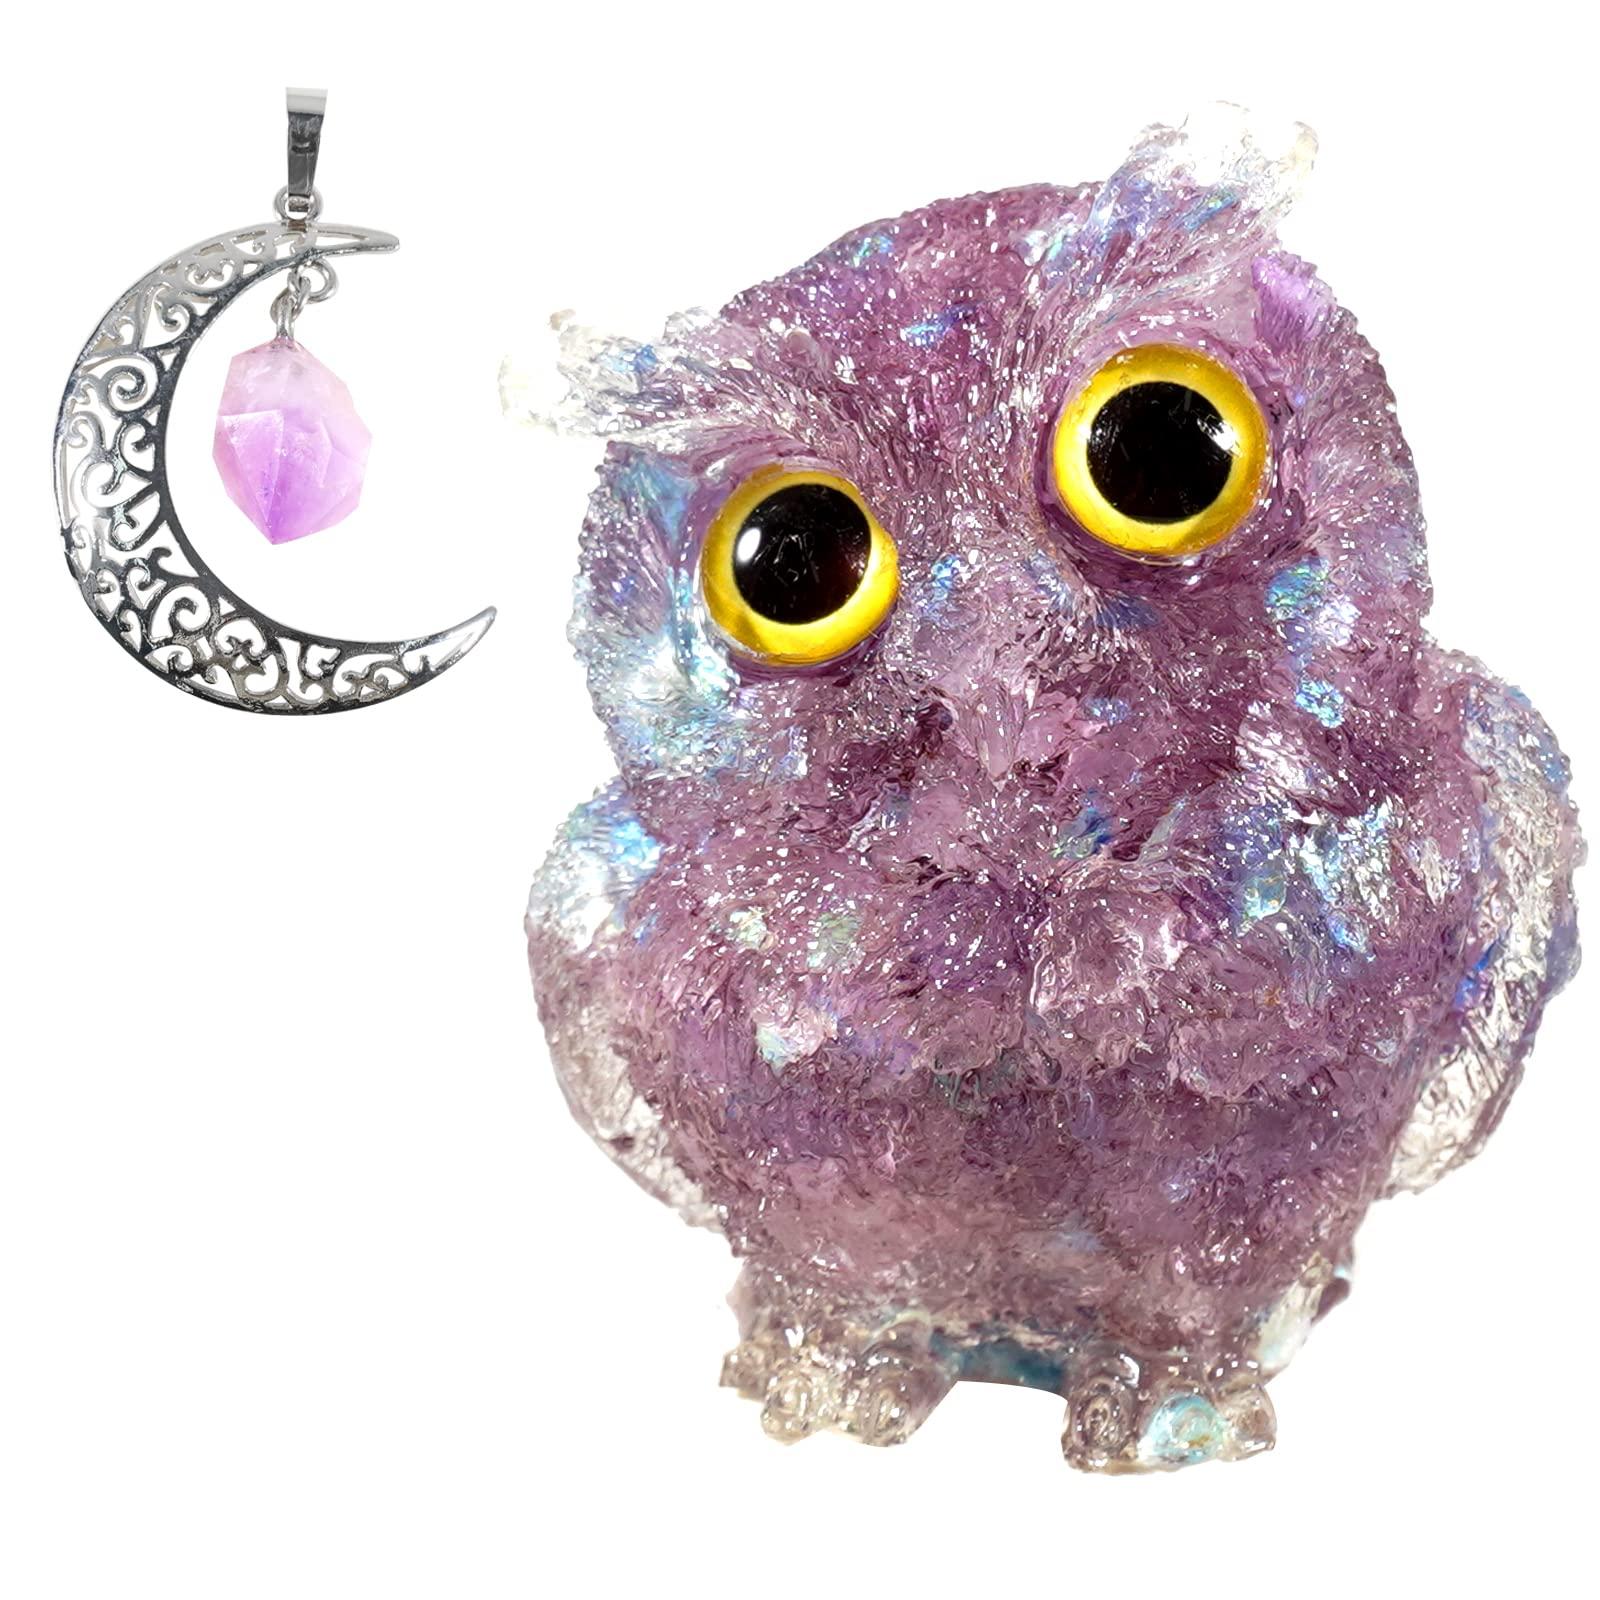 Soulnioi Gemstone Moon Necklace Antique Silver Plated Crystal Necklace Pendant, Crystal Owl Statue Ornament Resin Chip Stones Figurine for Home Office Decor (Amethyst)